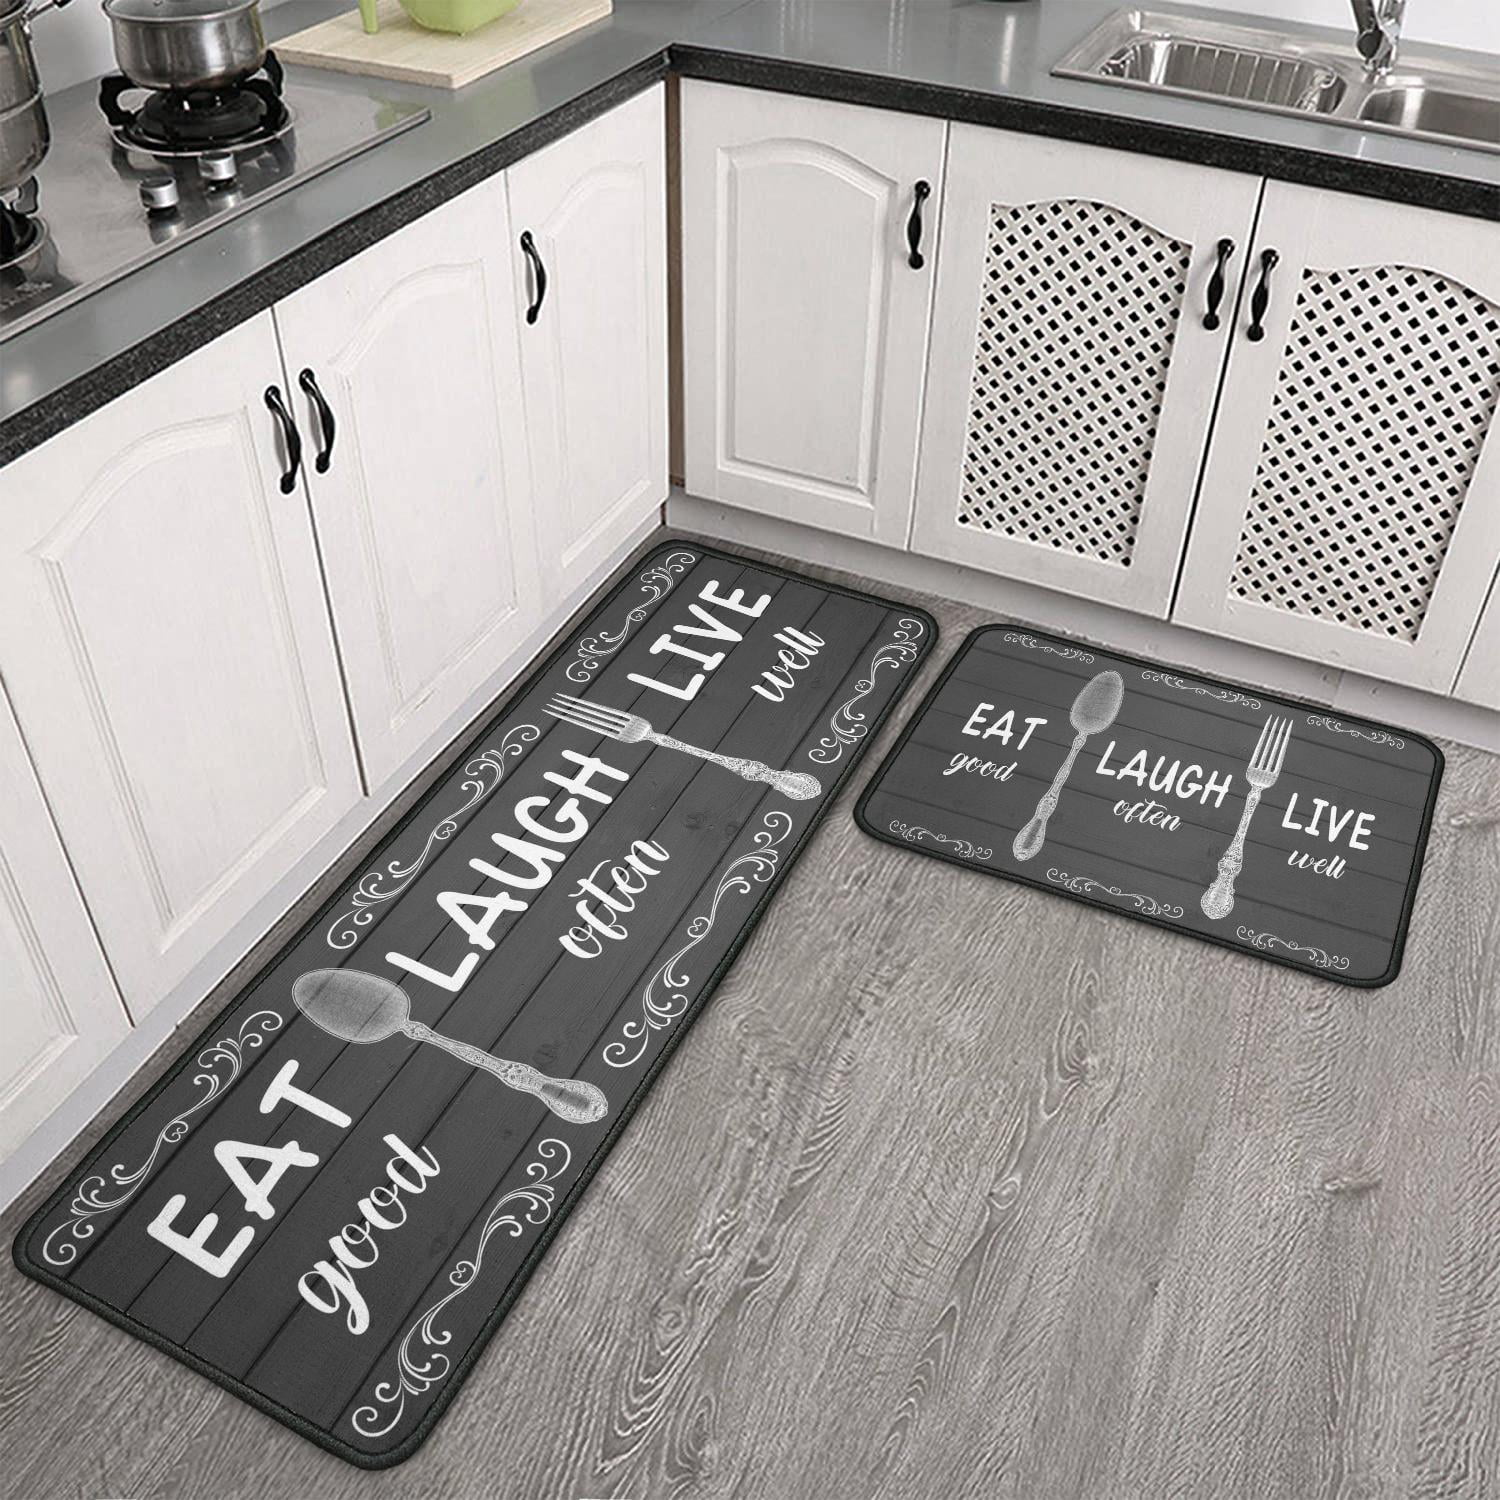 The Cook's Nook - We've carried Wellness Mats for at least 5 years